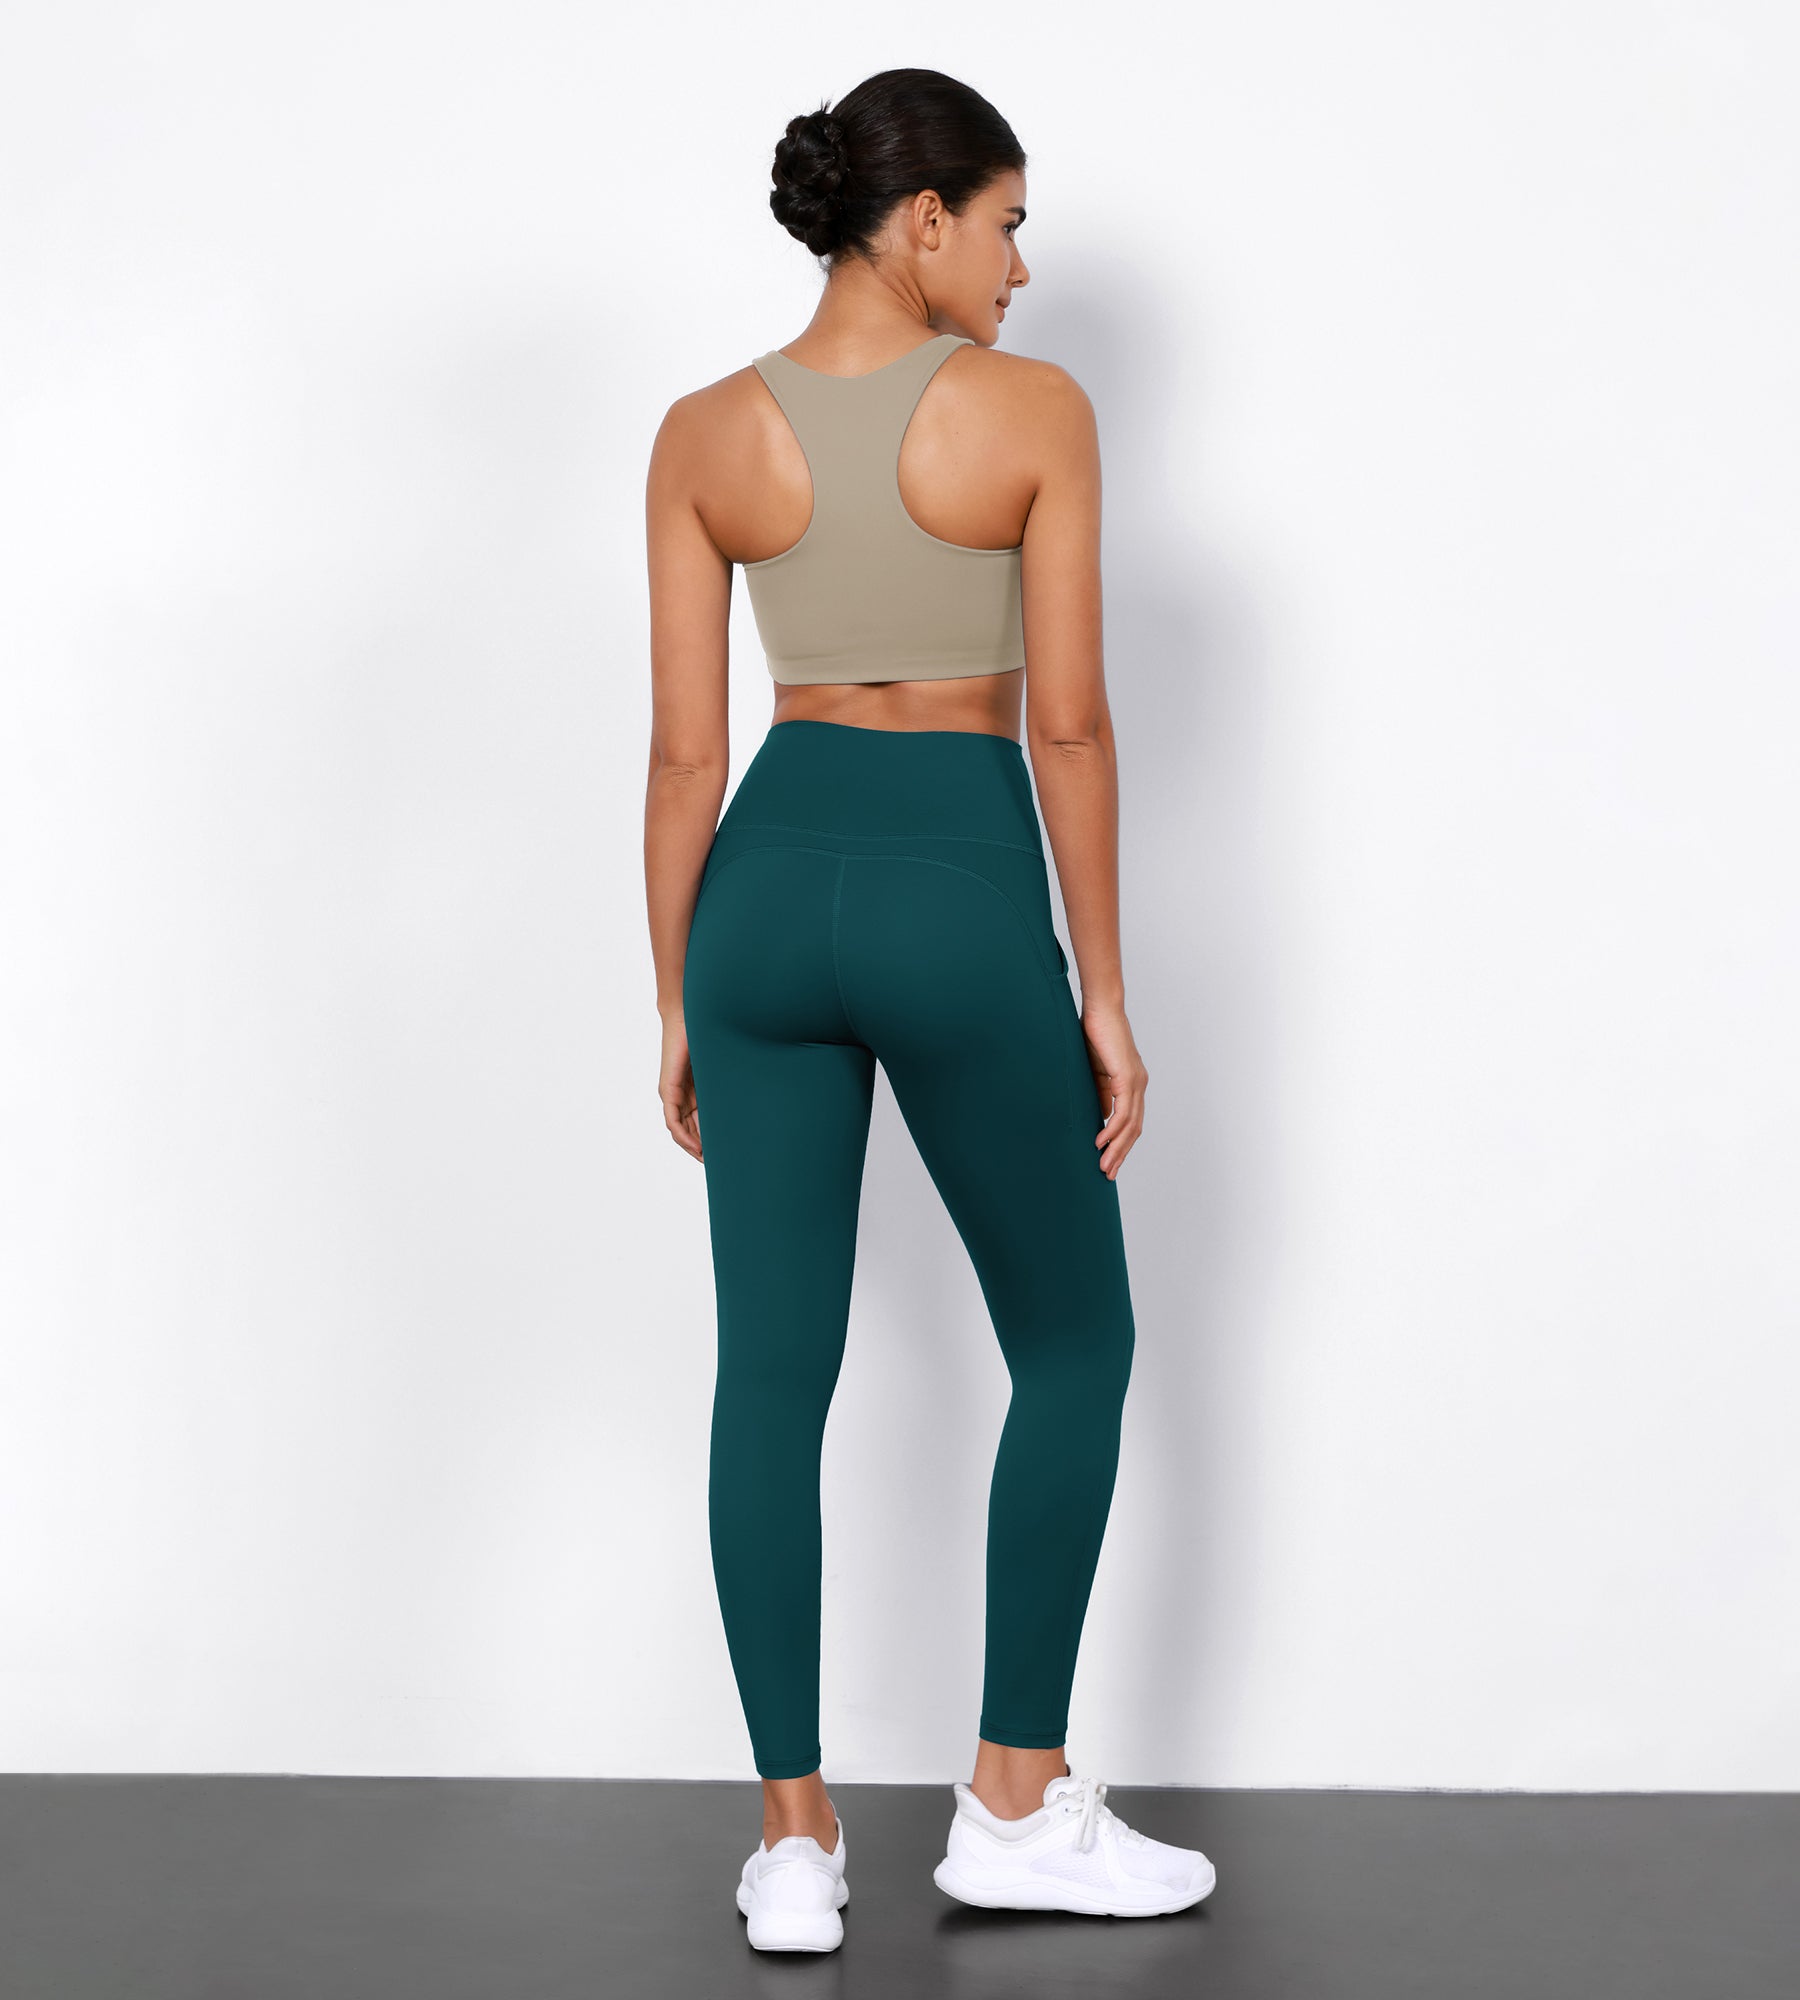 2-Pack 7/8 High Waist Workout Leggings with Pockets Black+Forest Teal - ododos